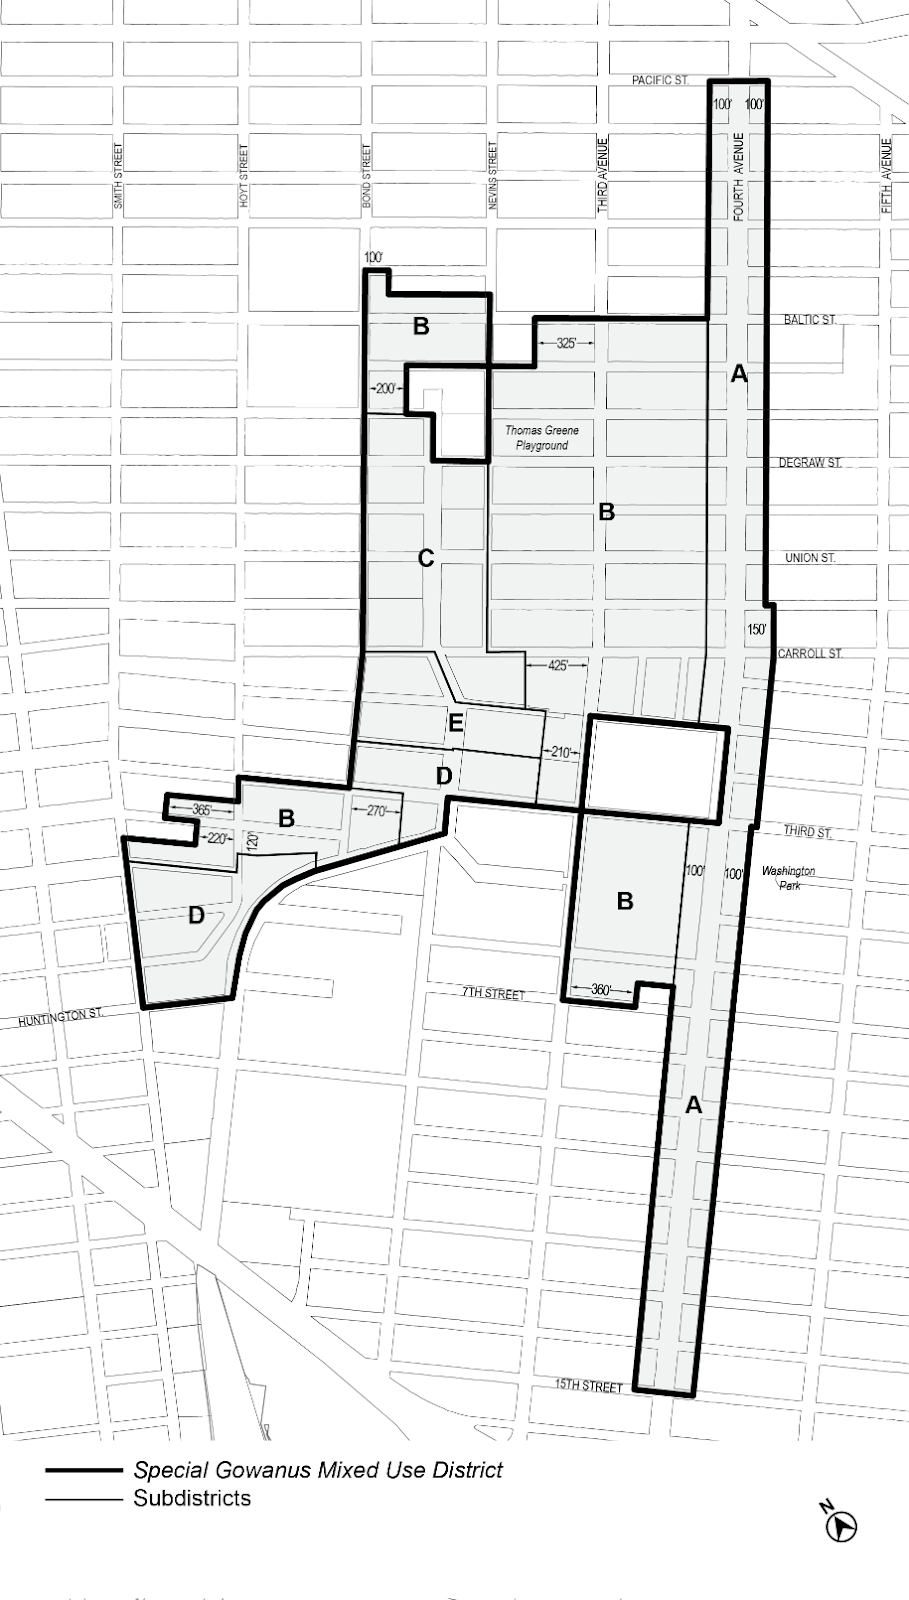 Zoning Resolutions Chapter 9: Special Gowanus Mixed Use District APPENDIX A.0